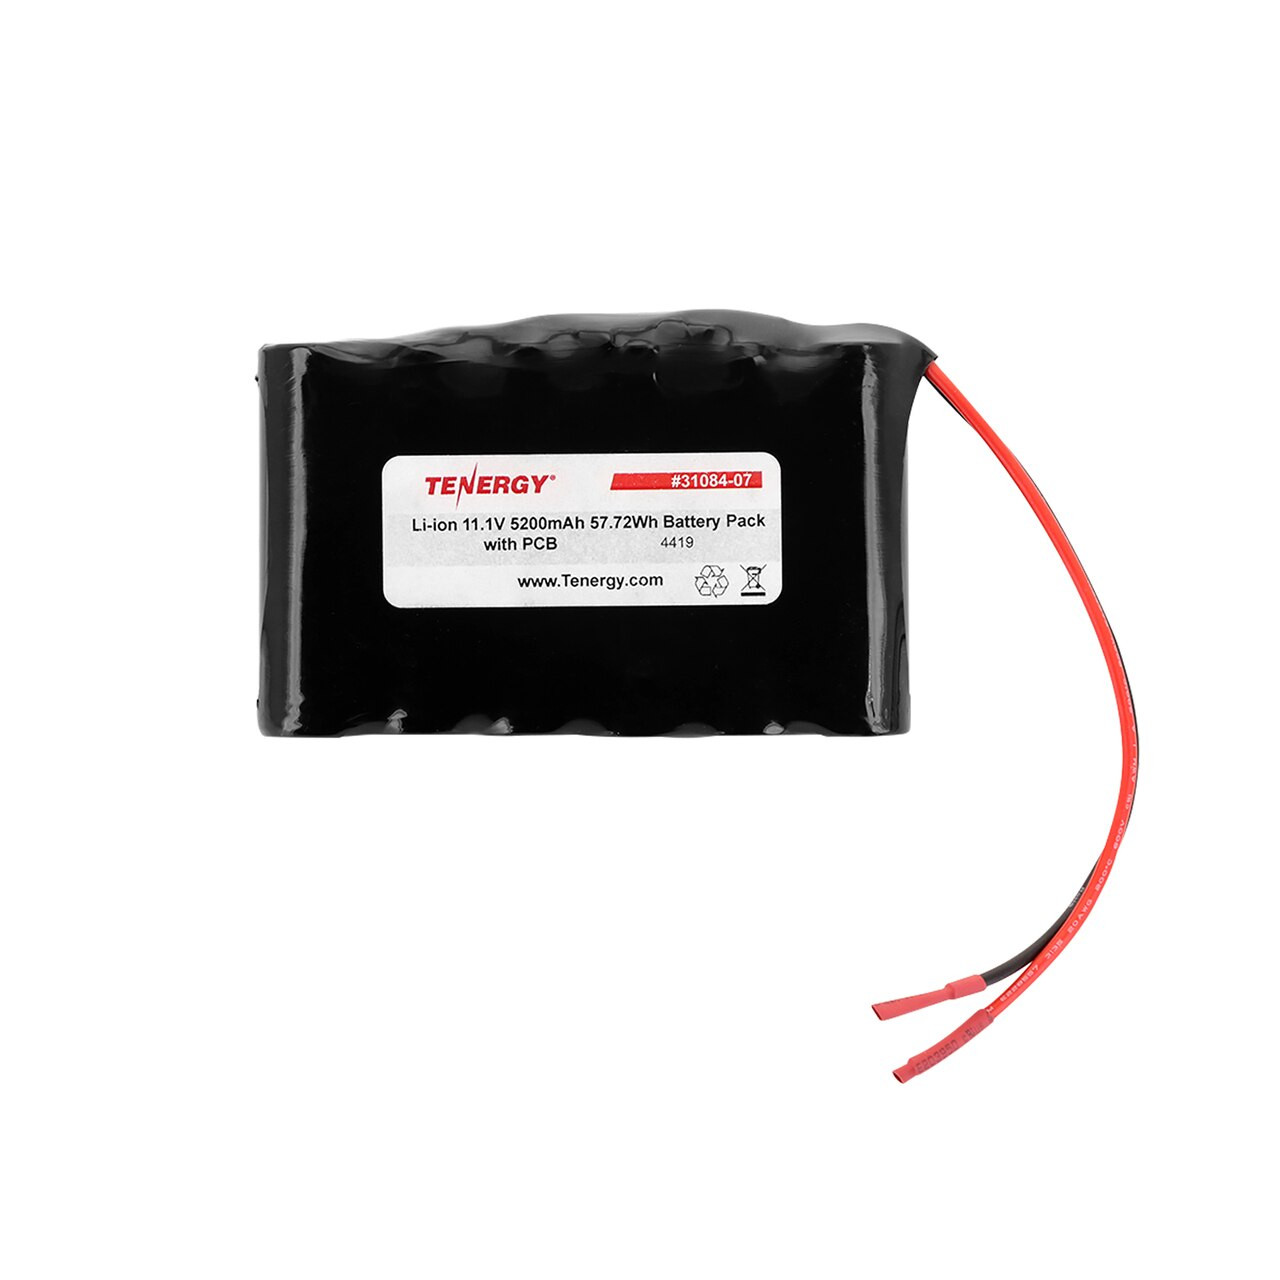 12v Rc Battery With Bare Leads 2200mah Ni-mh 10 Cells Rechargeable